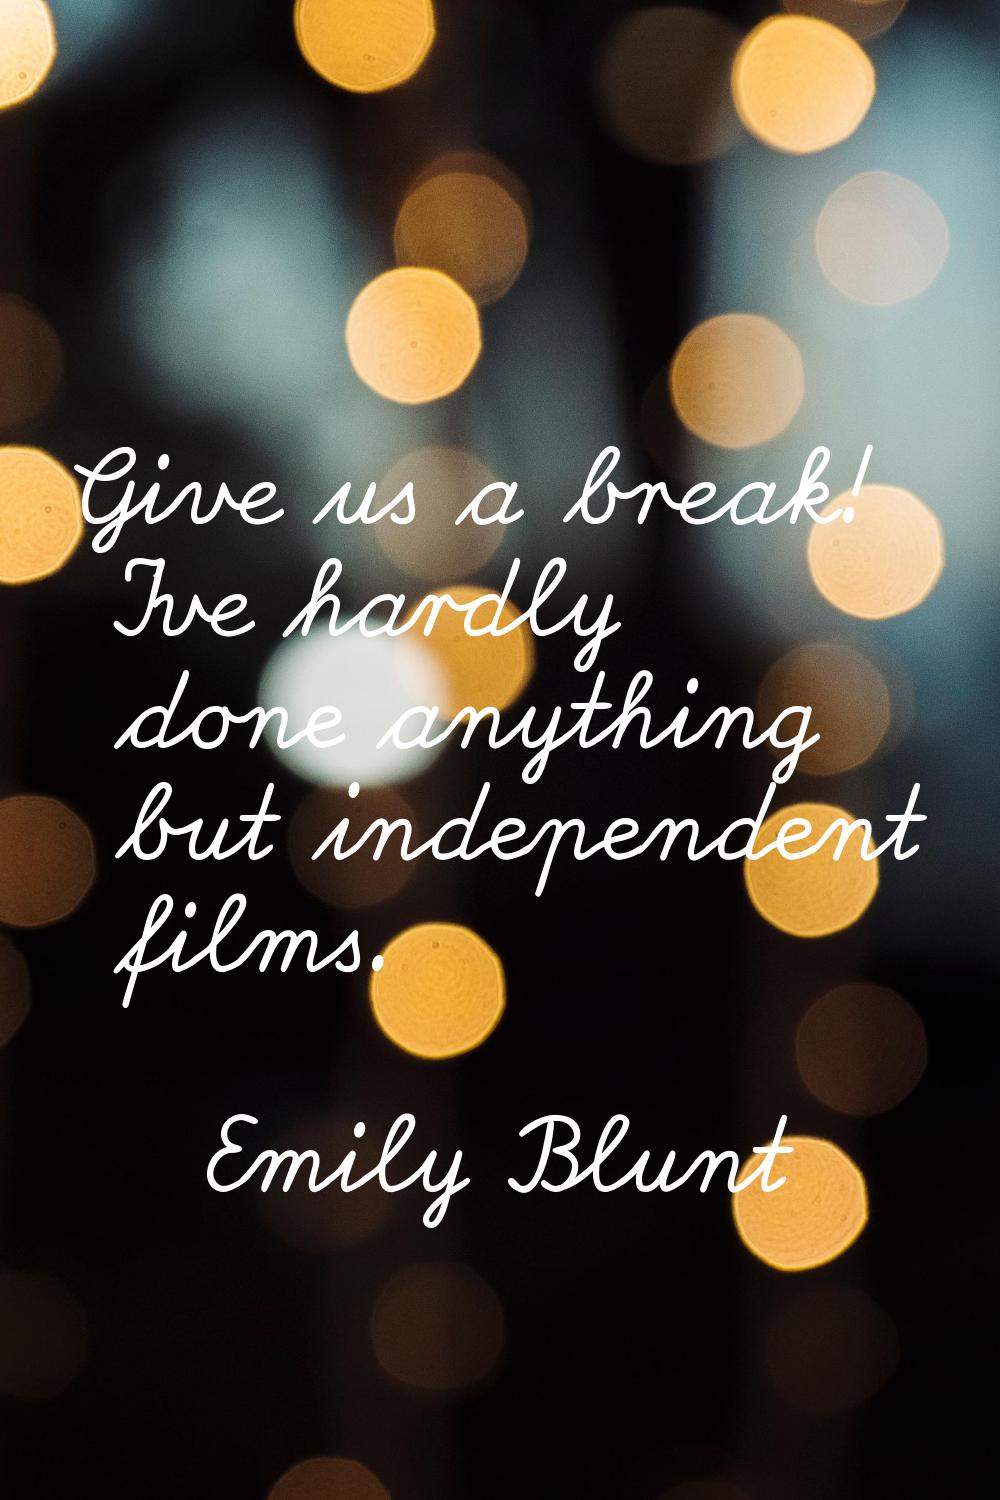 Give us a break! I've hardly done anything but independent films.